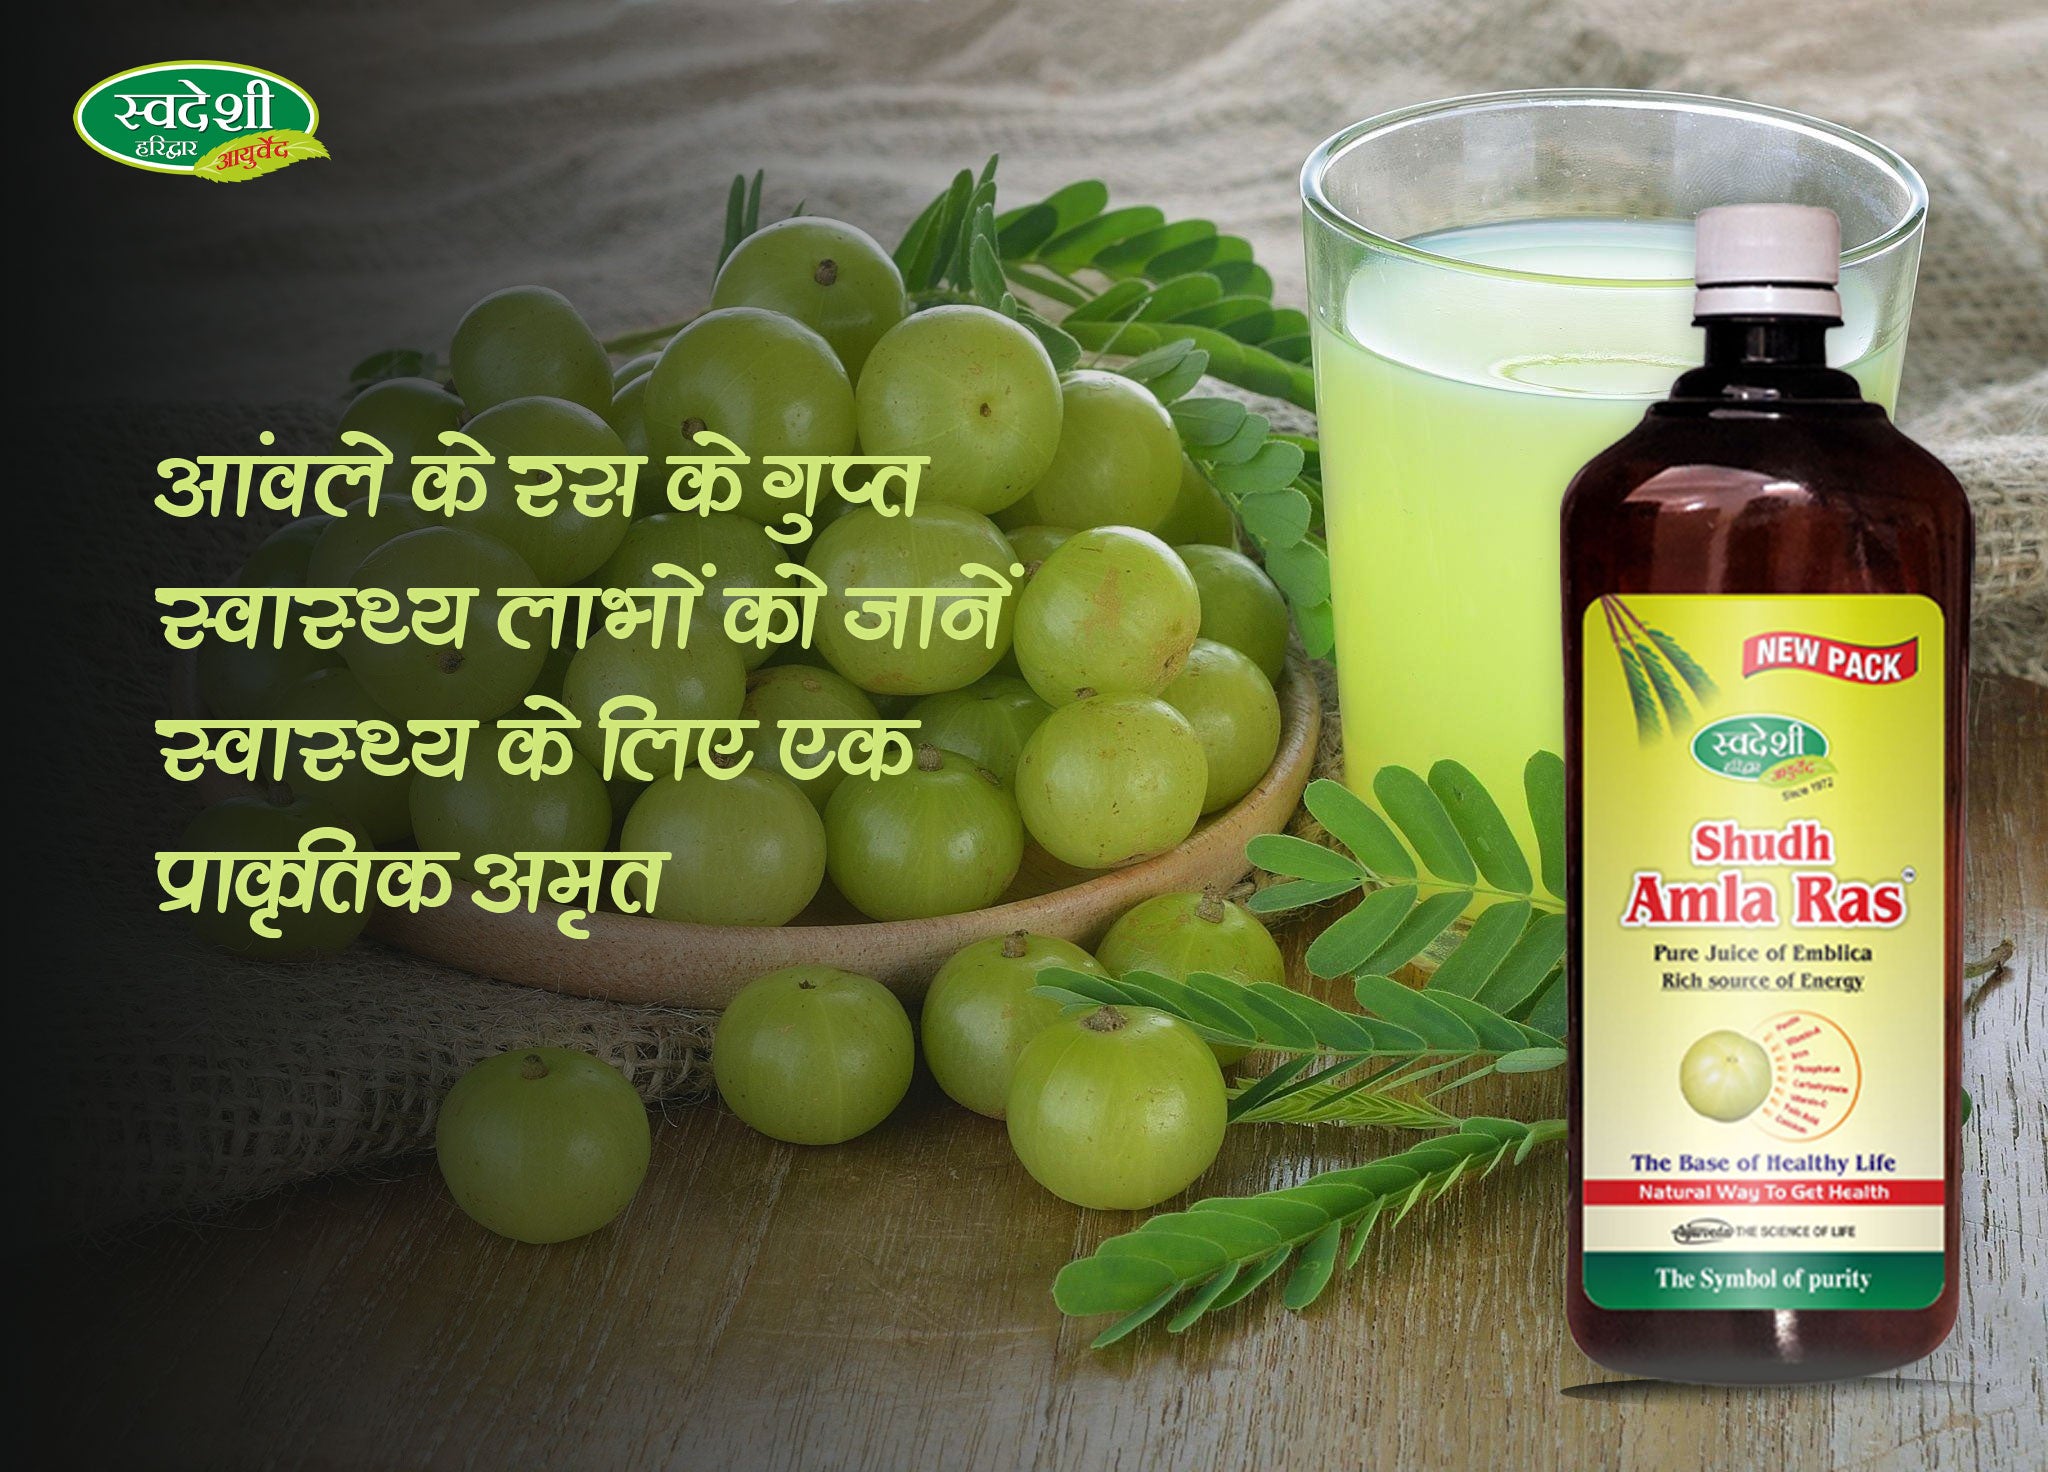 Amla Juice: Unveiling the hidden health benefits. Learn about the concealed health advantages of Amla juice and how it can promote a healthy and happy life